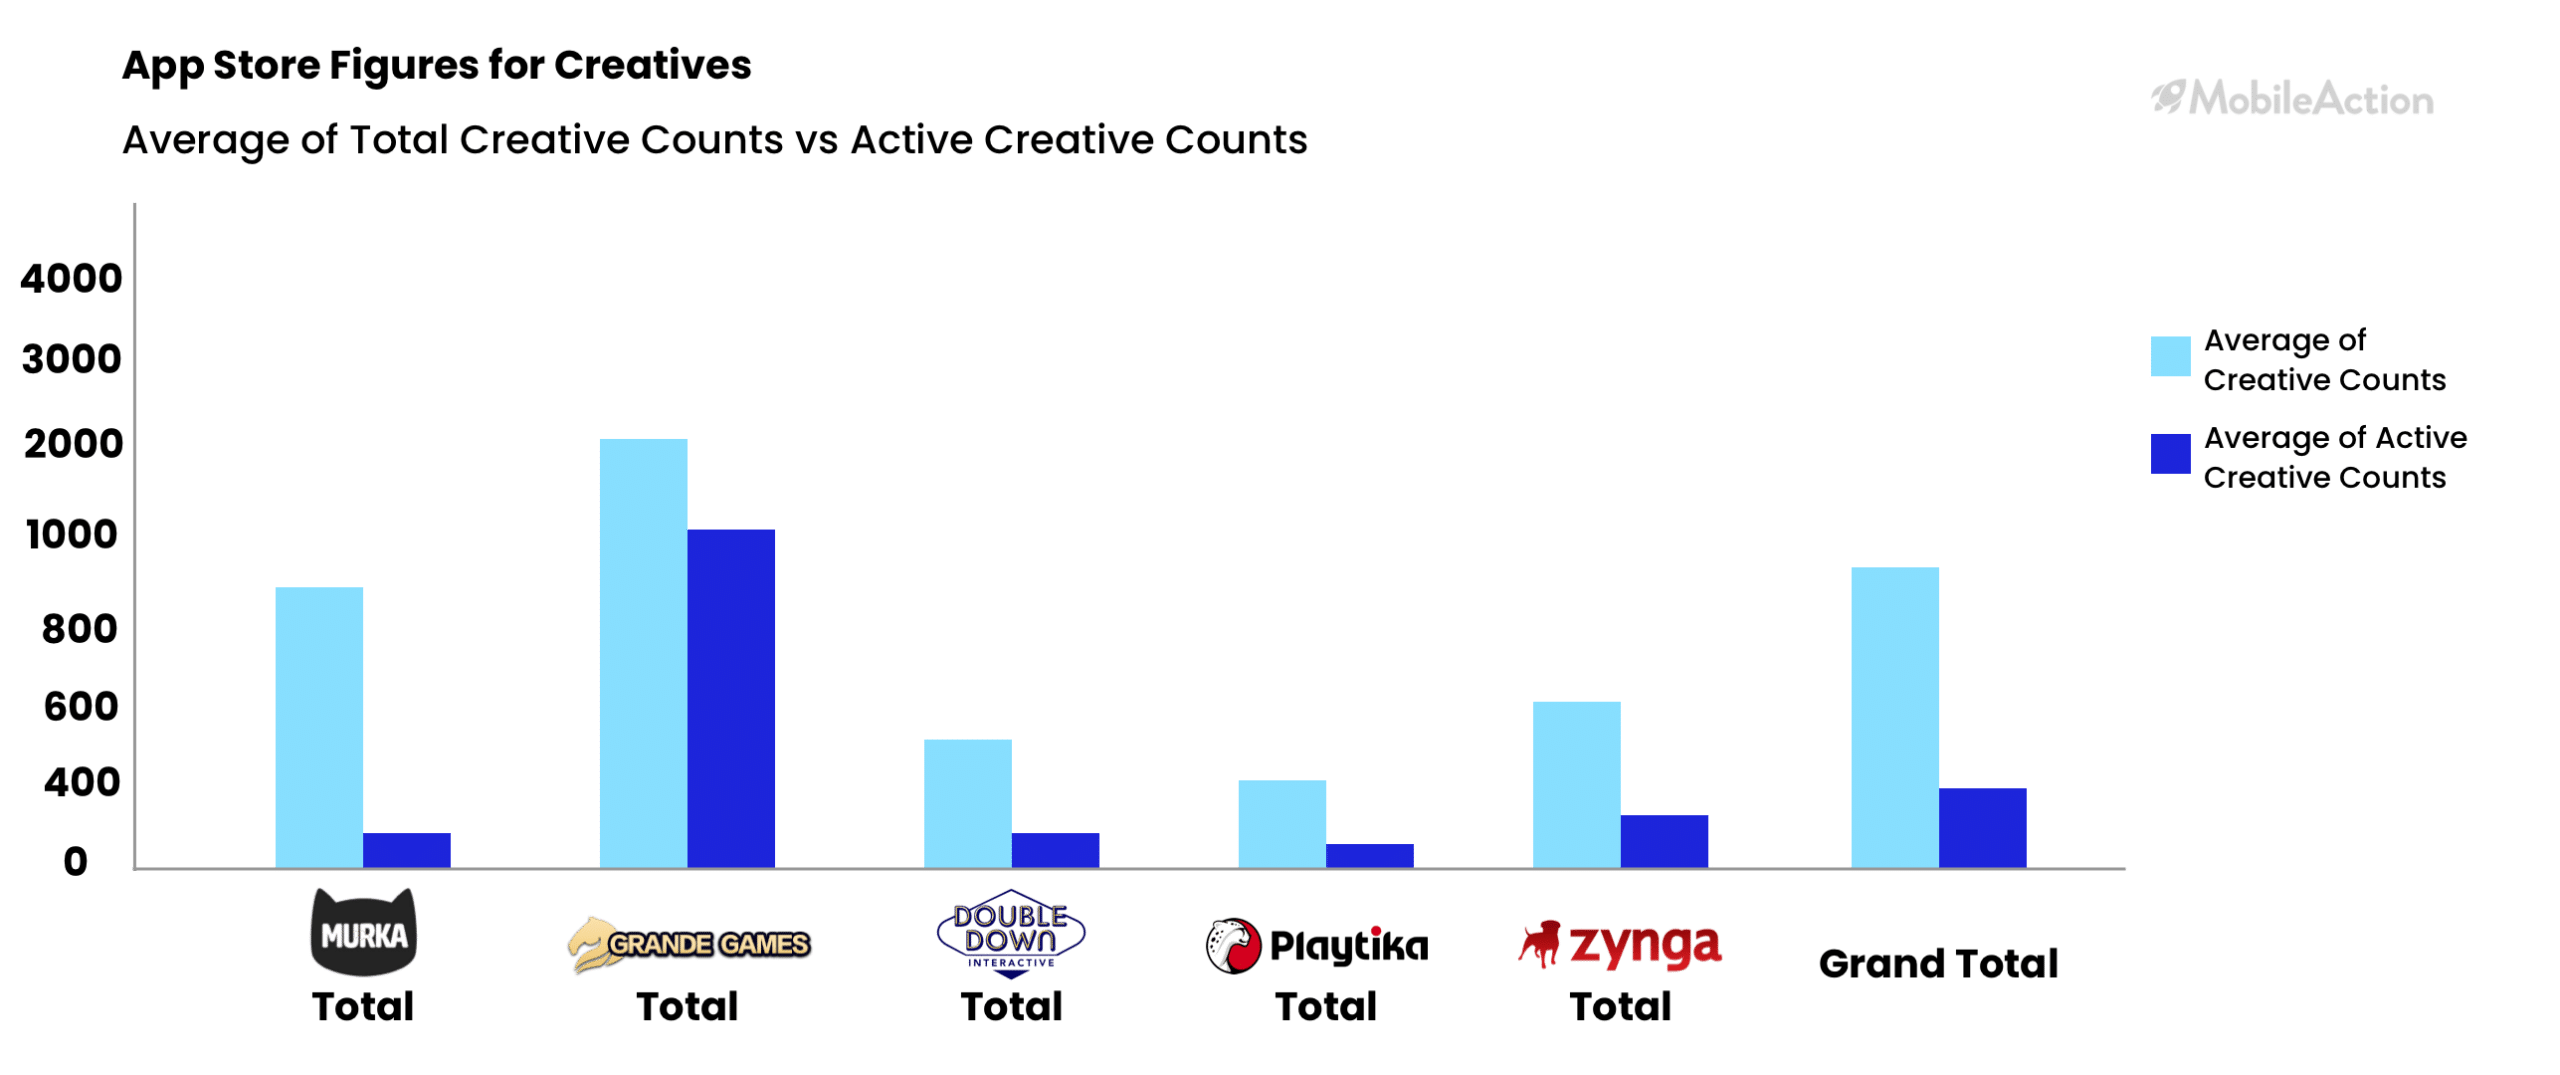 app store figures for creatives